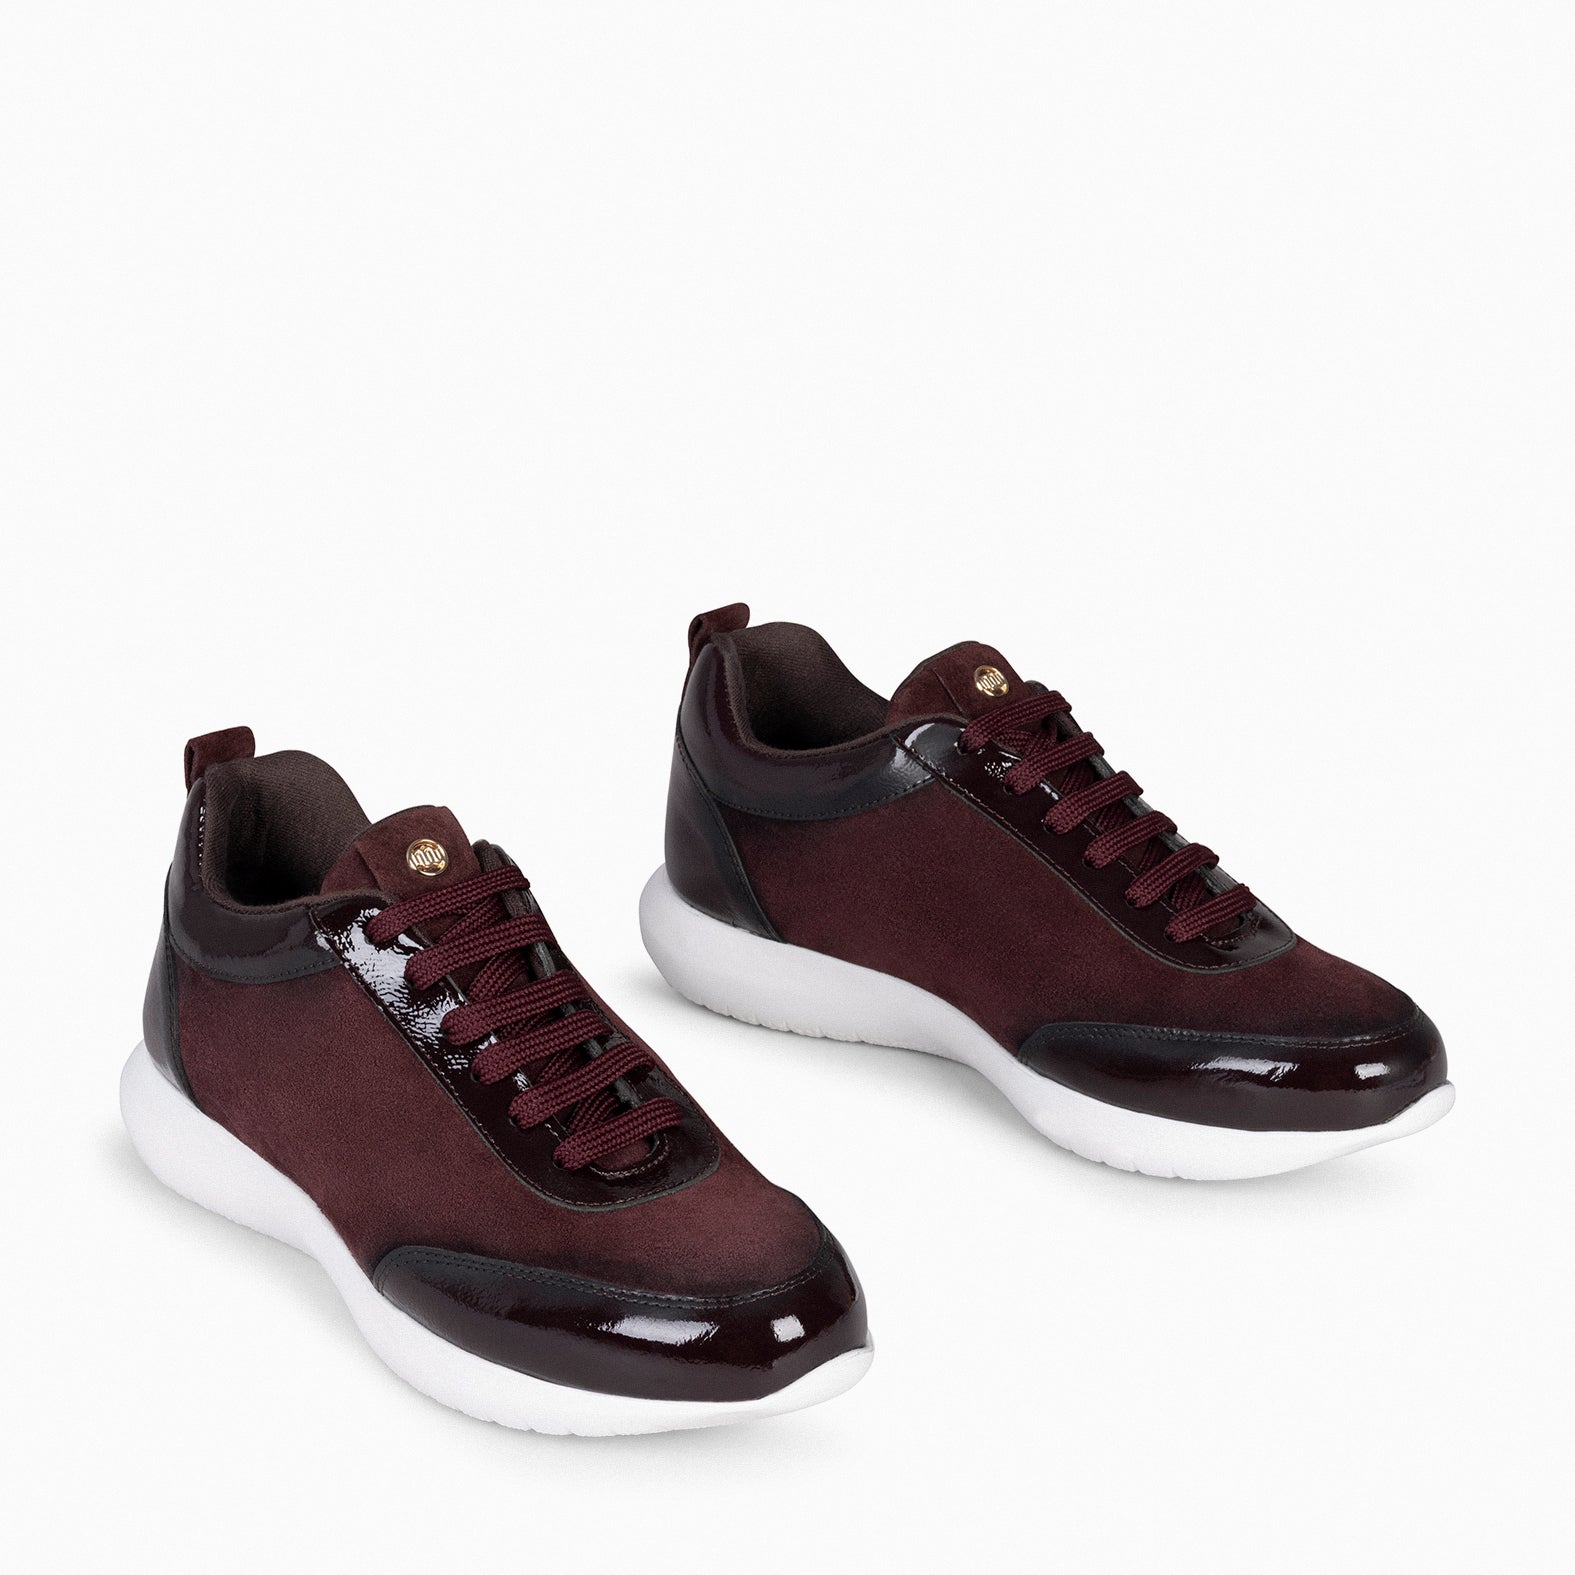 LOIRA - BURGUNDY Sneakers with Patent Leather